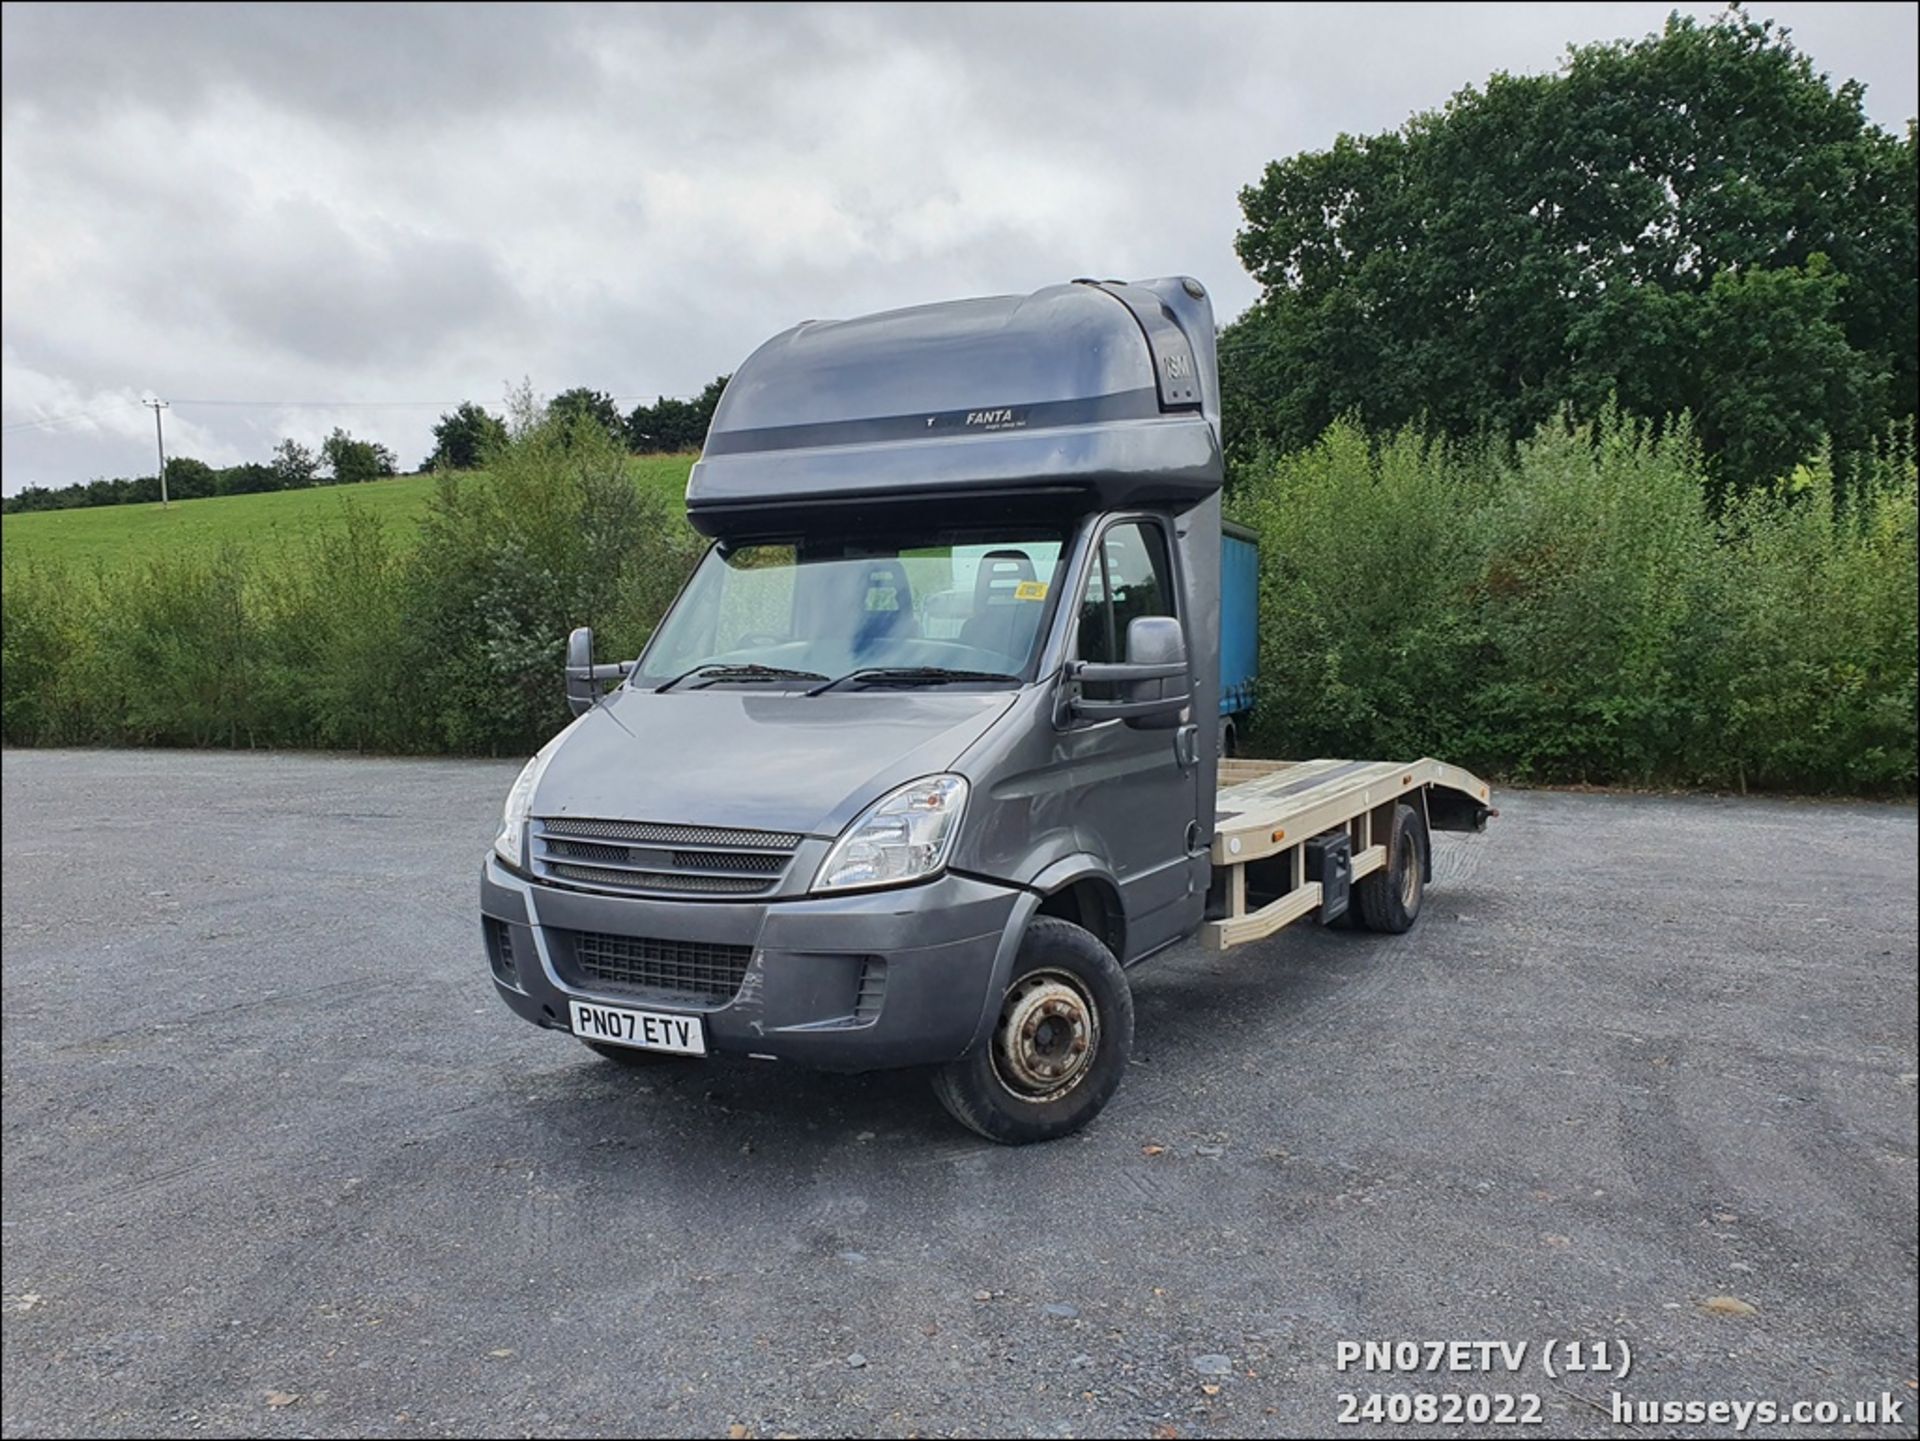 07/07 IVECO DAILY 65C18 - 2998cc VEHICLE TRANSPORTER 2dr (Grey) - Image 39 of 66